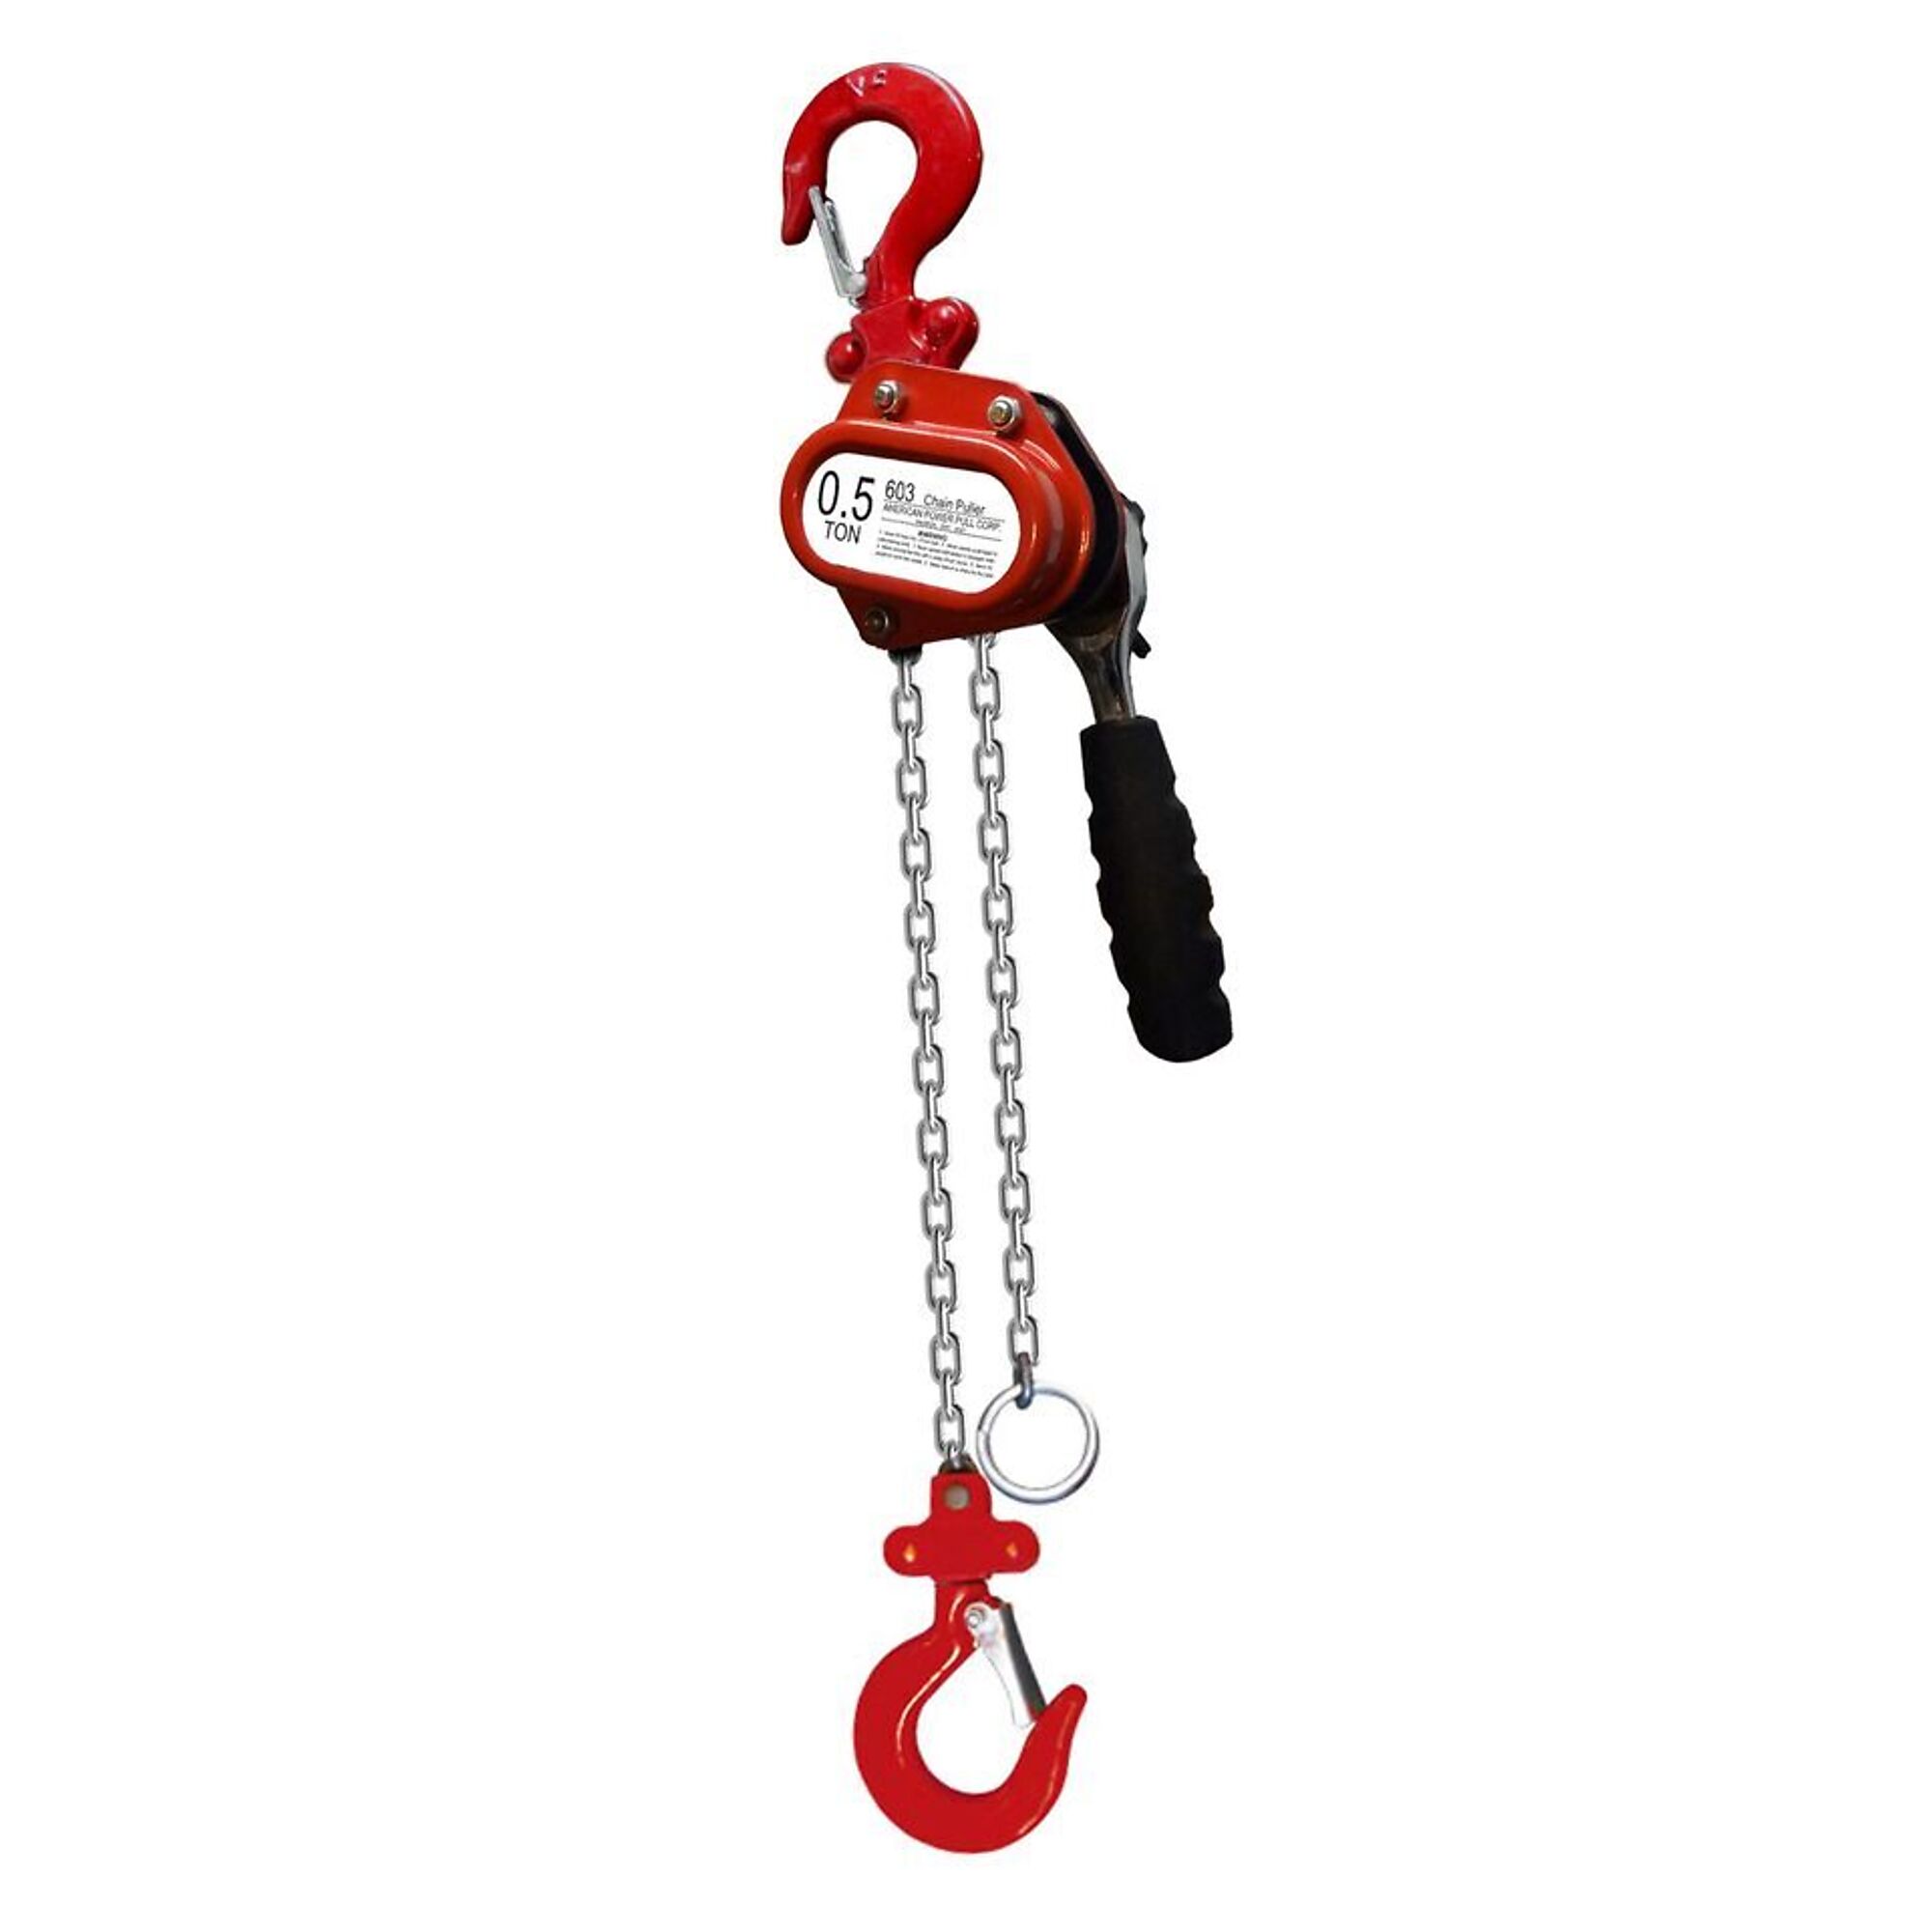 American Power Pull, .5 ton chain puller w/ 15ft. lift, Power Source Manual Lever, Capacity 1000 lb, Lift Height 15 ft, Model 603-15